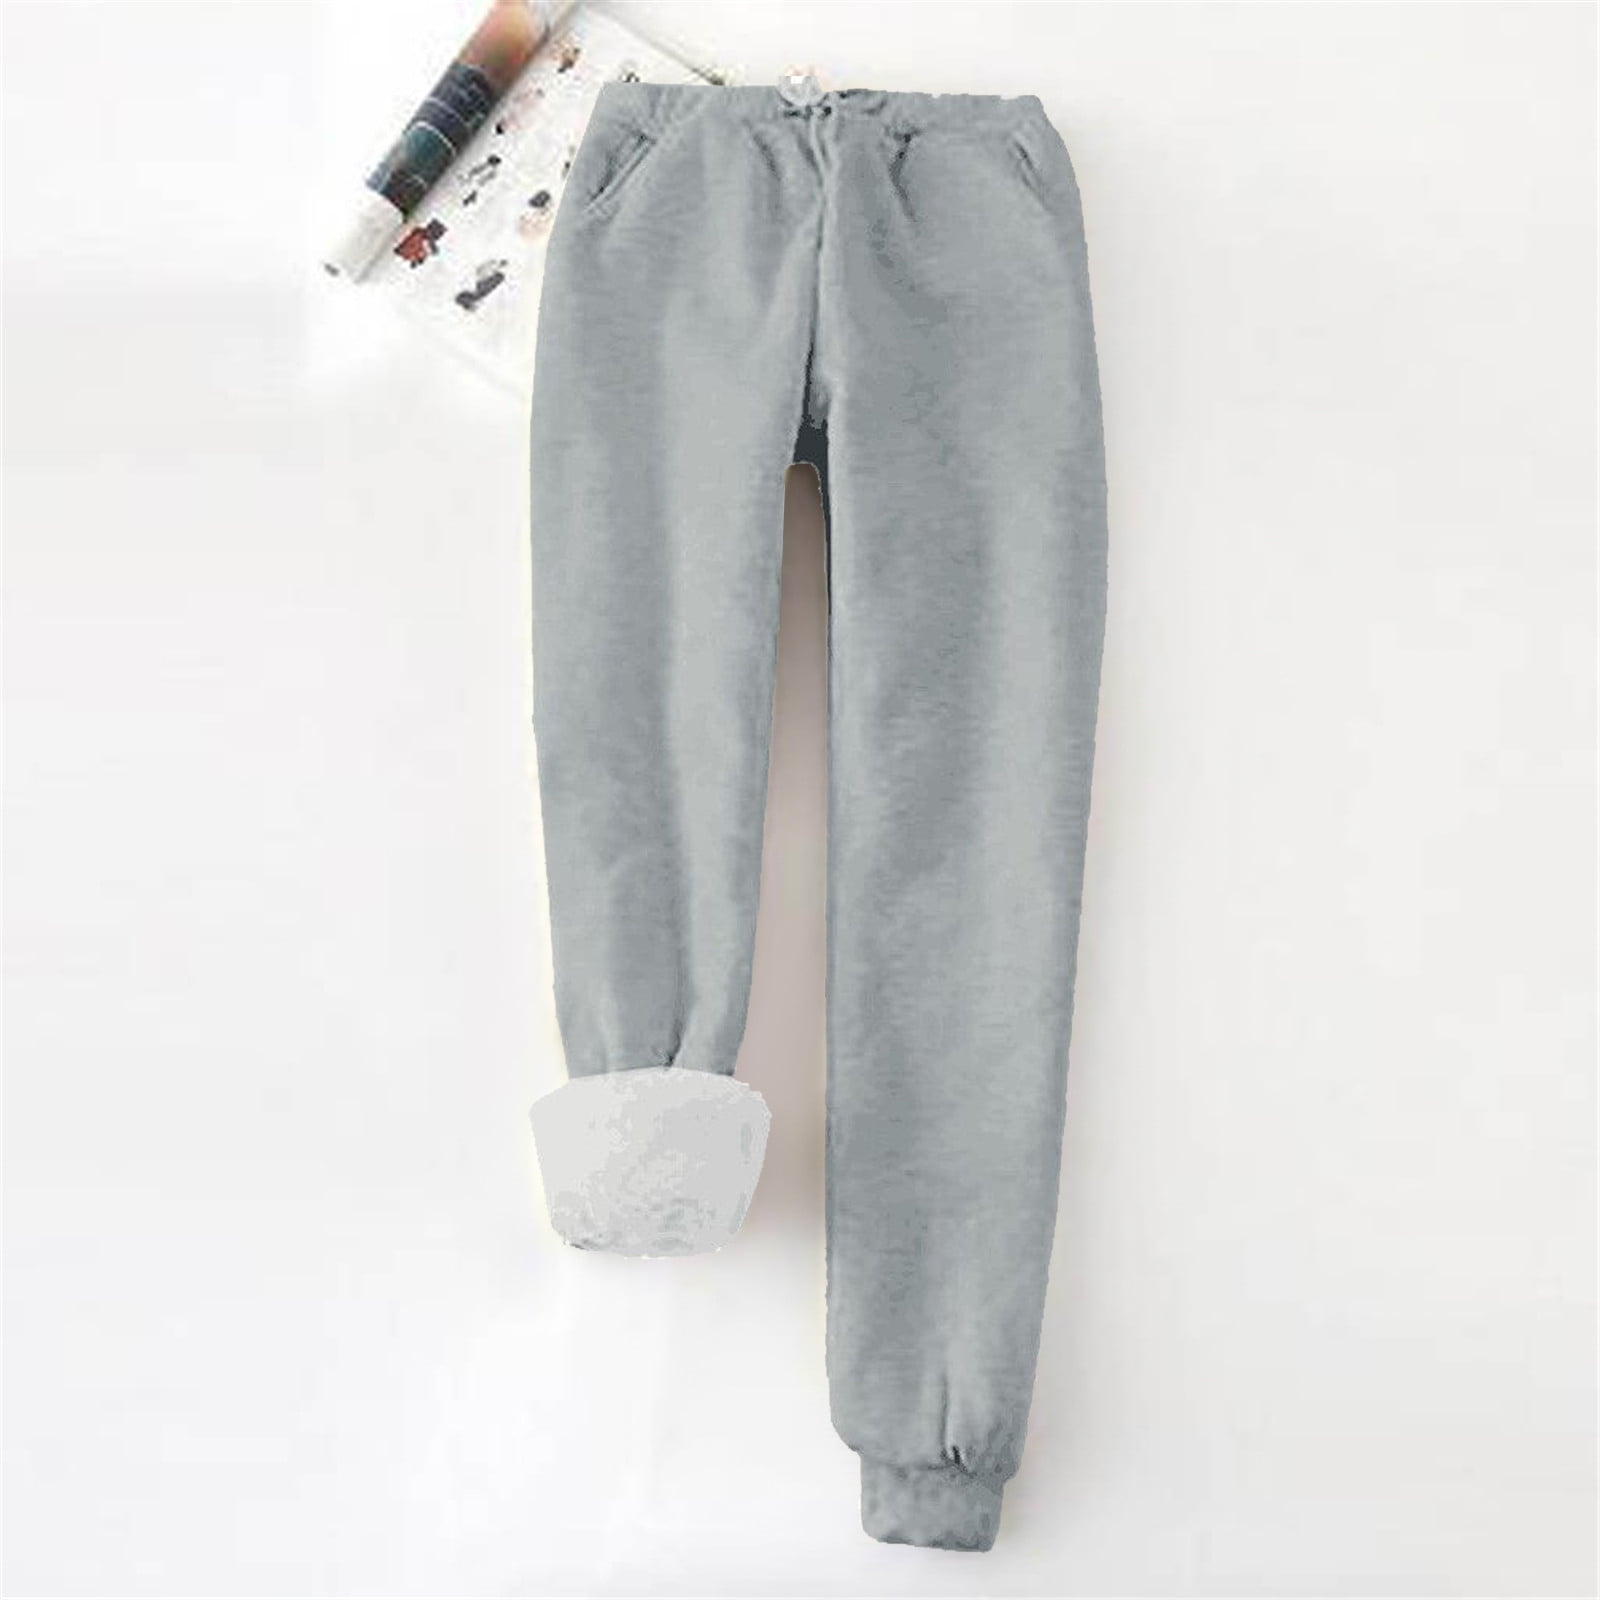 Susanny Tall Sweatpants for Women Fleece Lined Straight Leg with